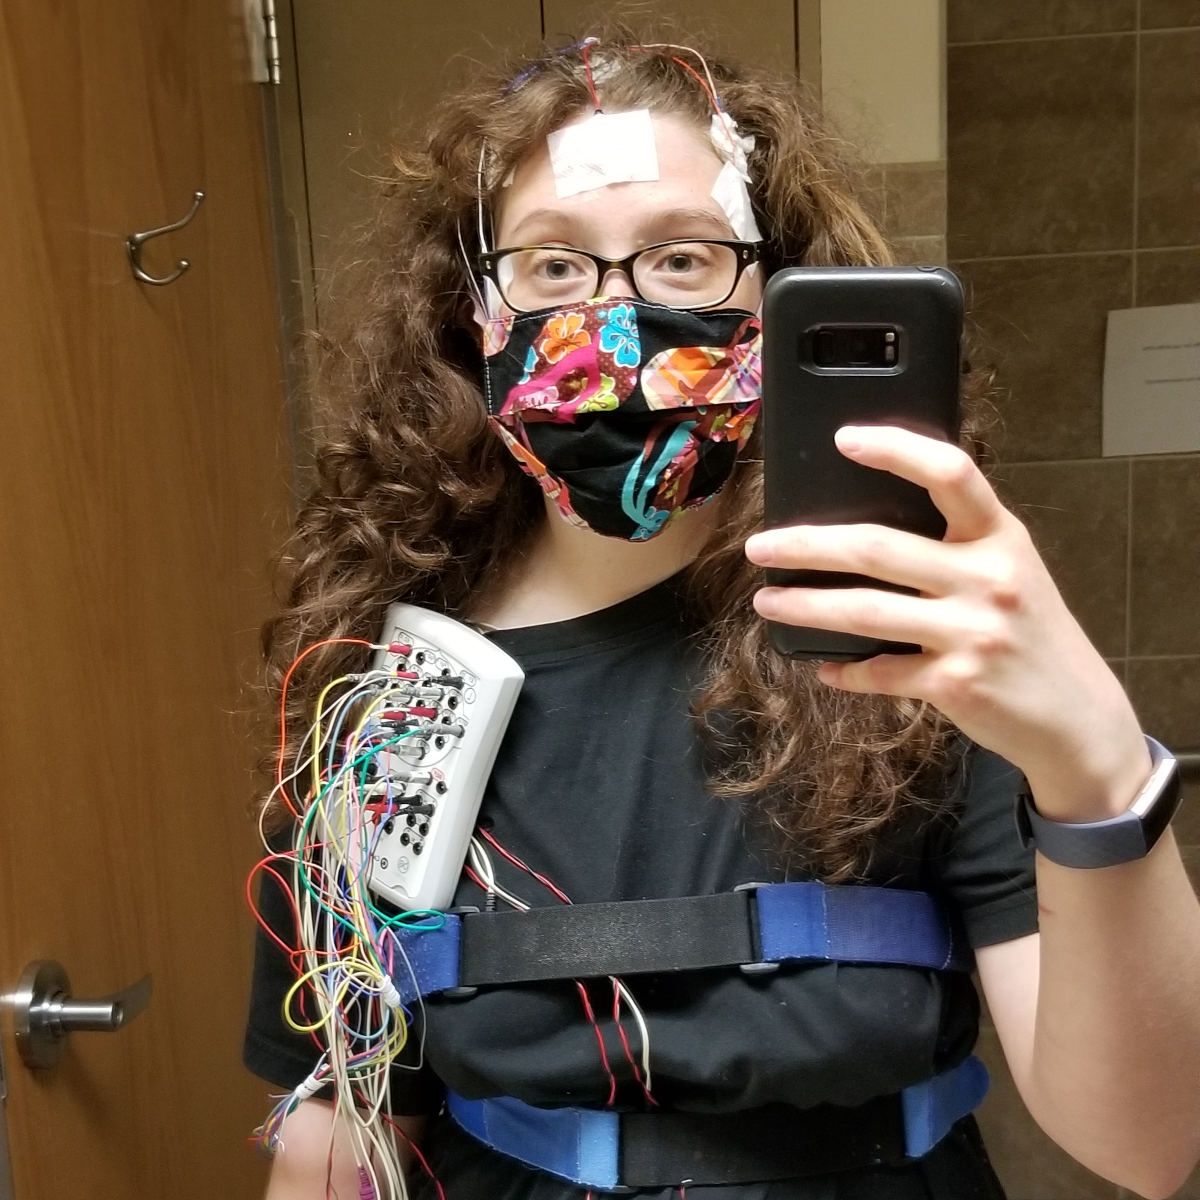 Me ready for my sleep study, hooked up to a lot of wires with straps around my chest and diaphragm